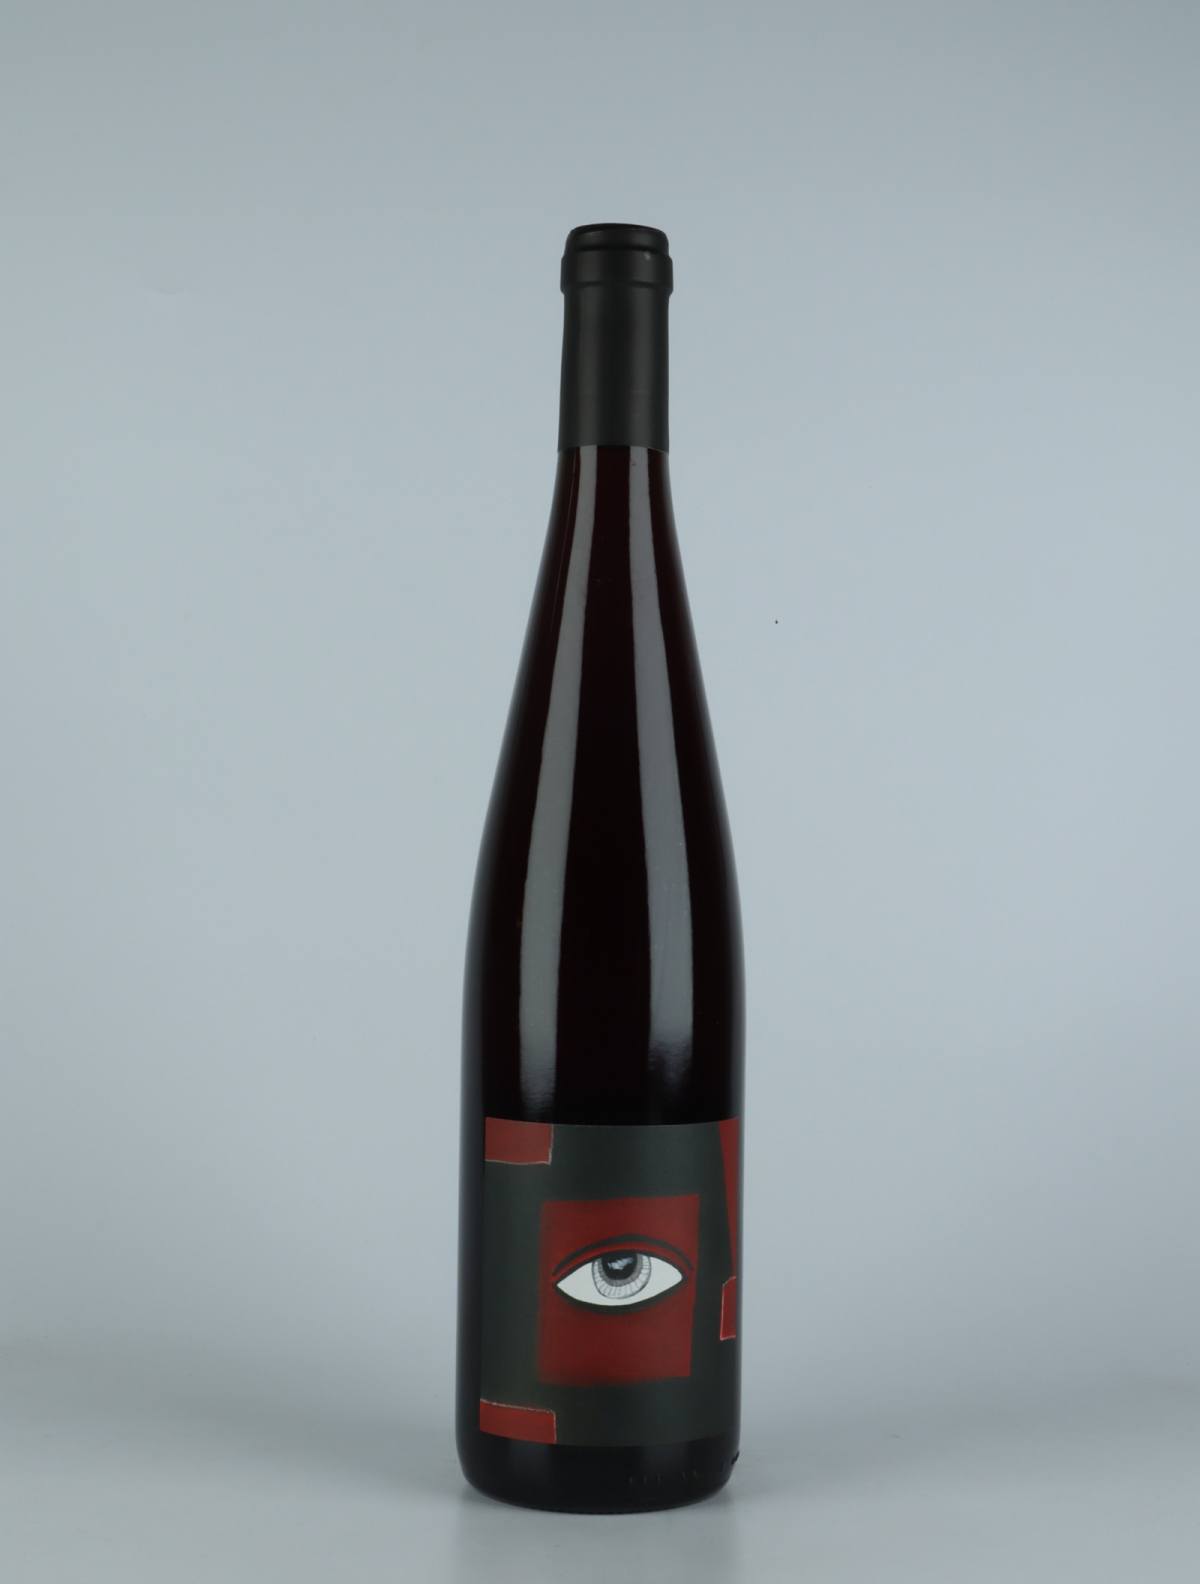 A bottle 2021 Pinot Noir Red wine from Domaine Rietsch, Alsace in France